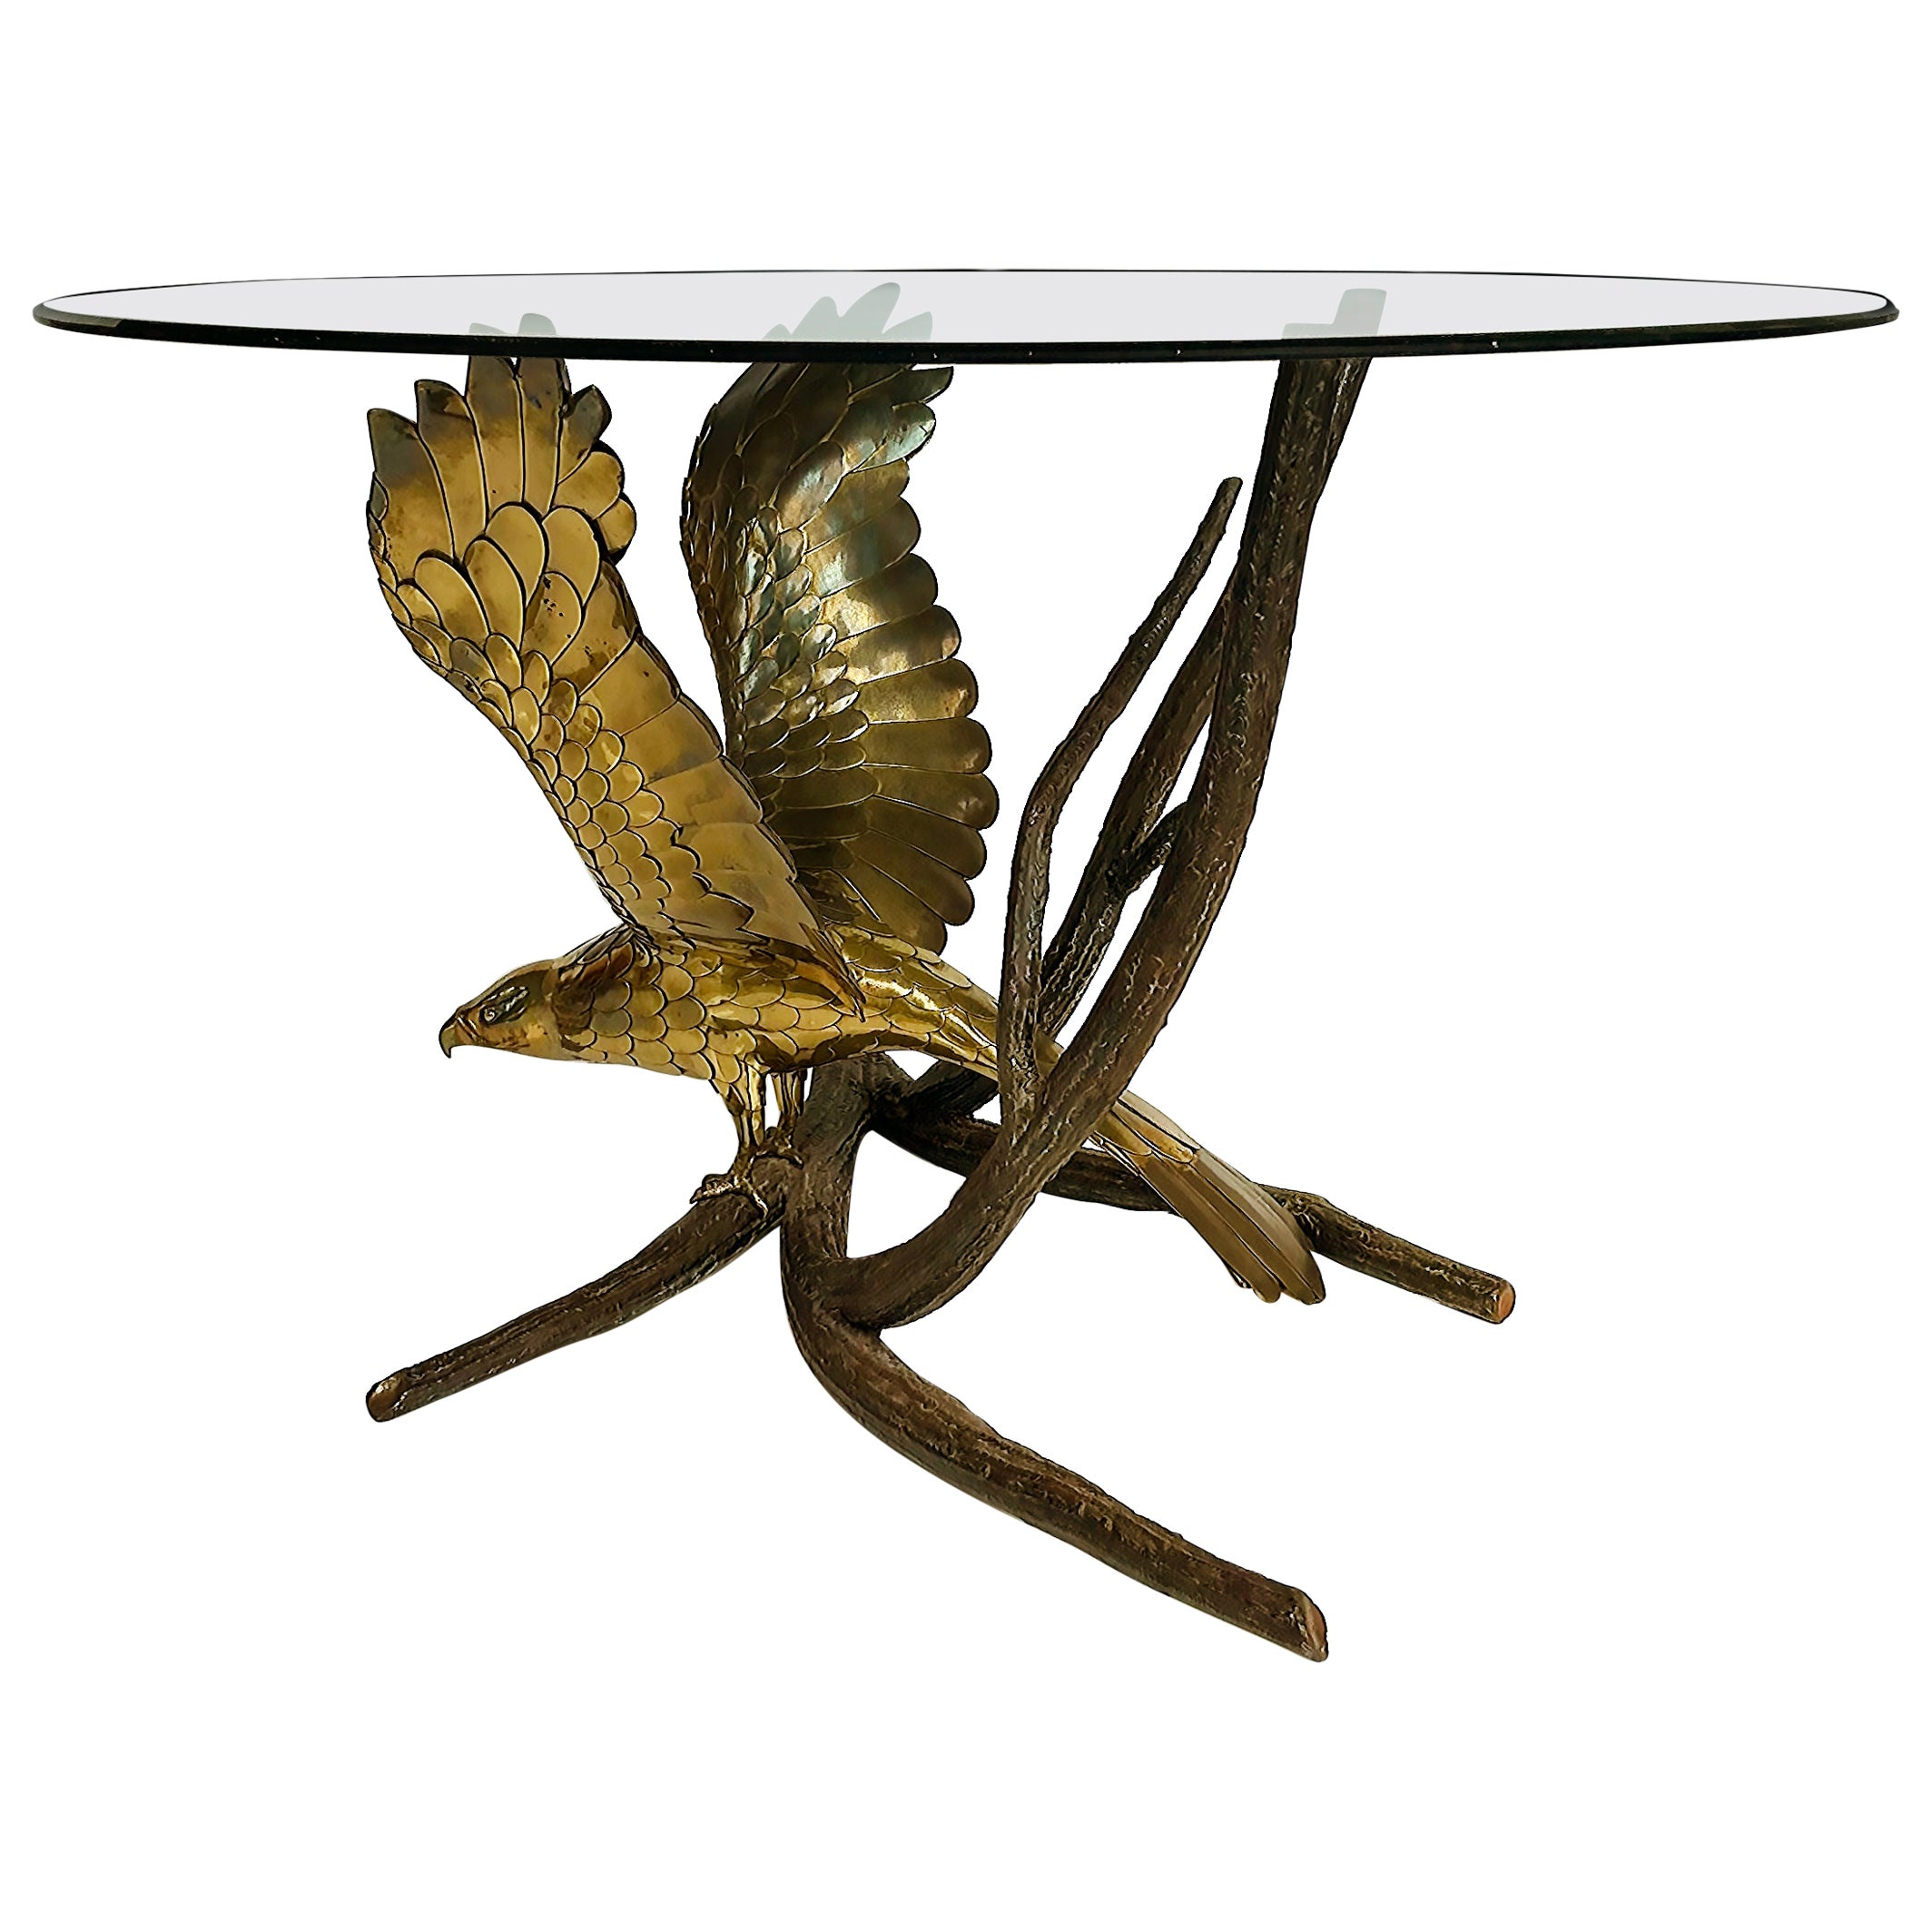  Alain Chervet French Sculptural Eagle Dining Center Table in Bronze and Brass For Sale